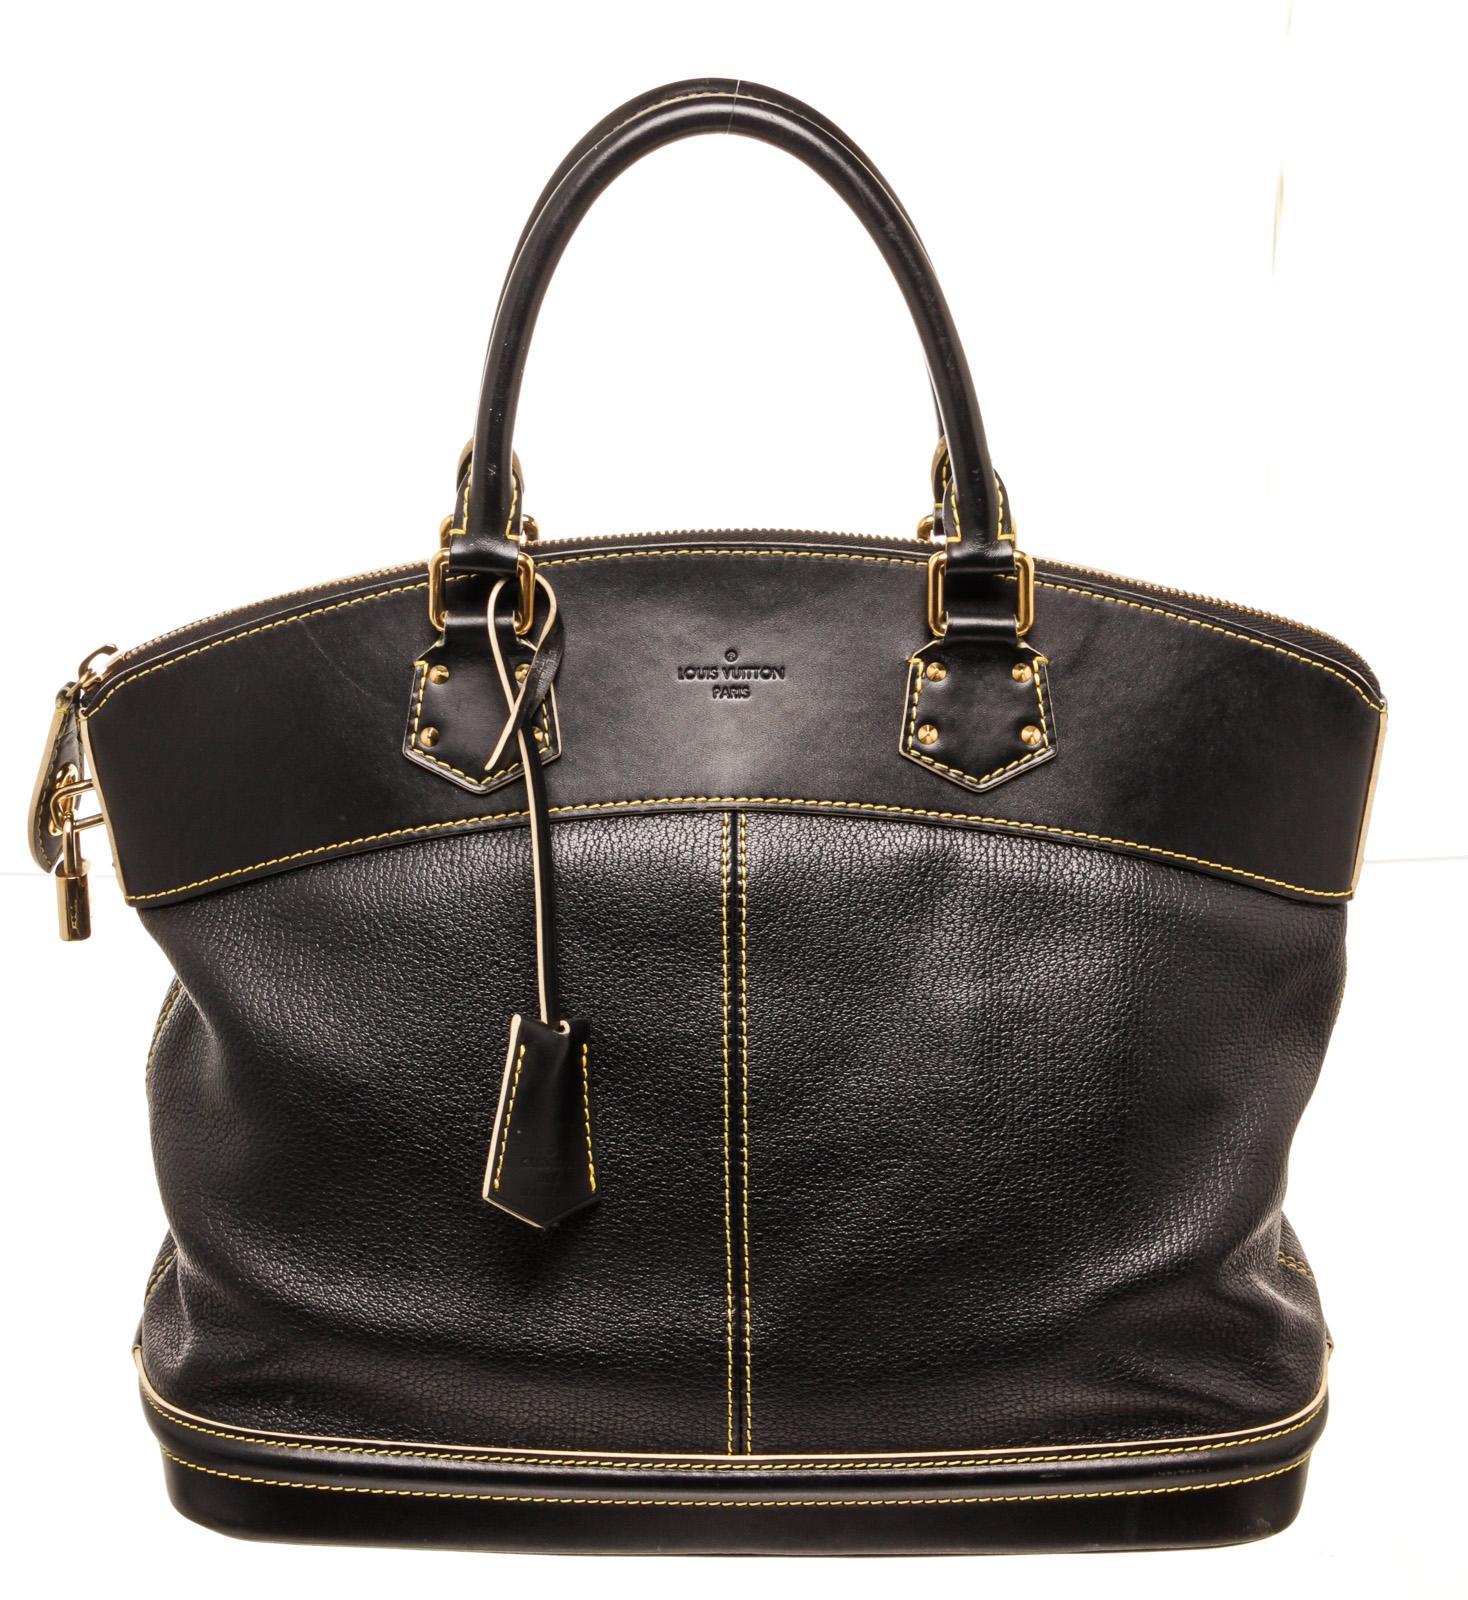 Louis Vuitton Black Suhali Leather Lockit MM Satchel Bag with suhali leather, brass hardware, dual rolled top handles, tonal jacquard lining, three pockets at interior; one with zip closure and zip closure at top. Includes dust bag, lock, keys, and